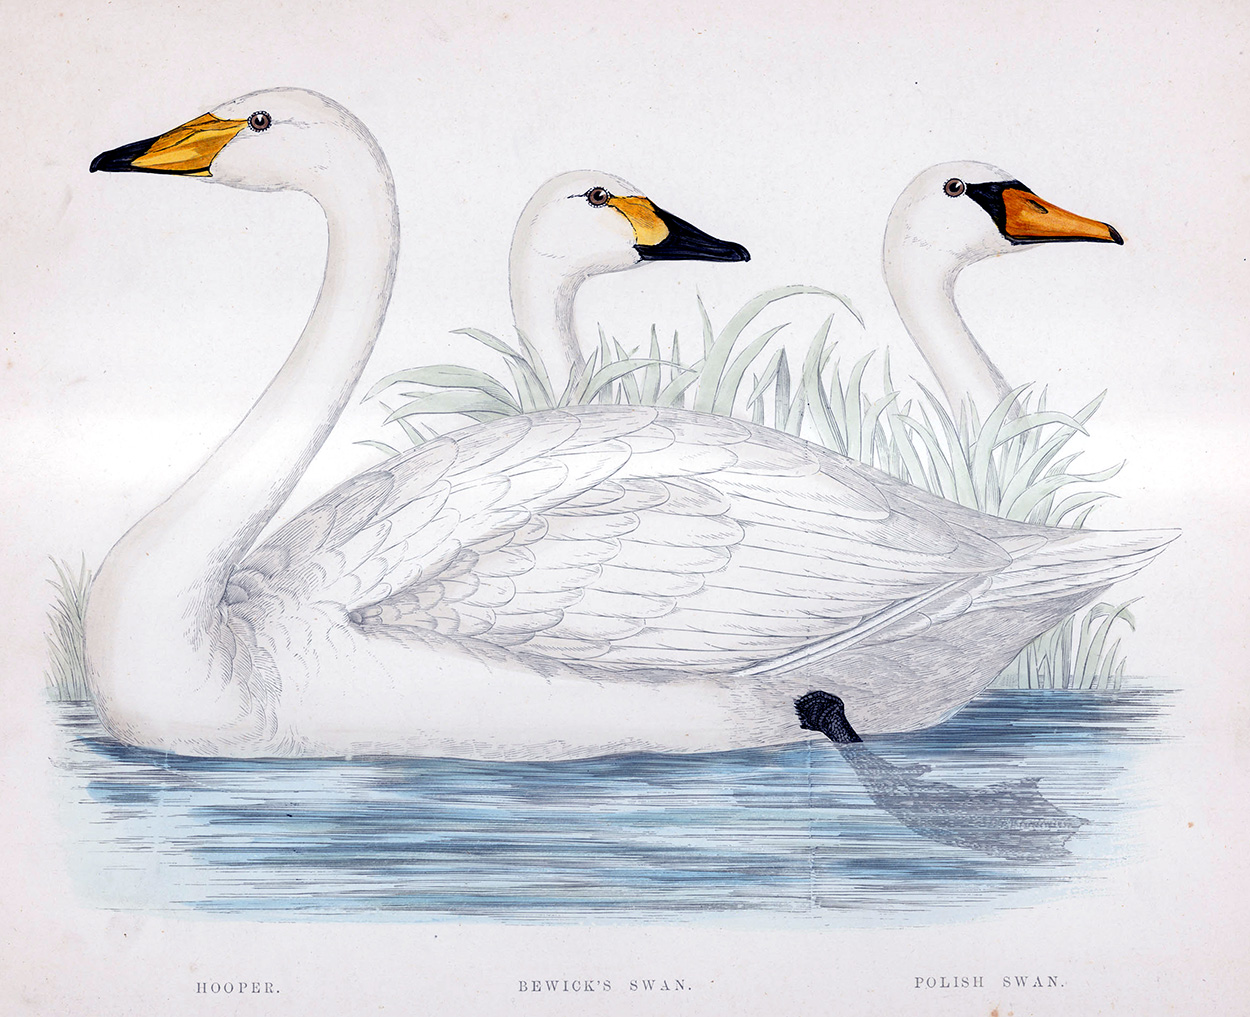 Bewick's Swan - hand coloured lithograph 1891 (Print) art by Beverley R Morris Art at The Illustration Art Gallery